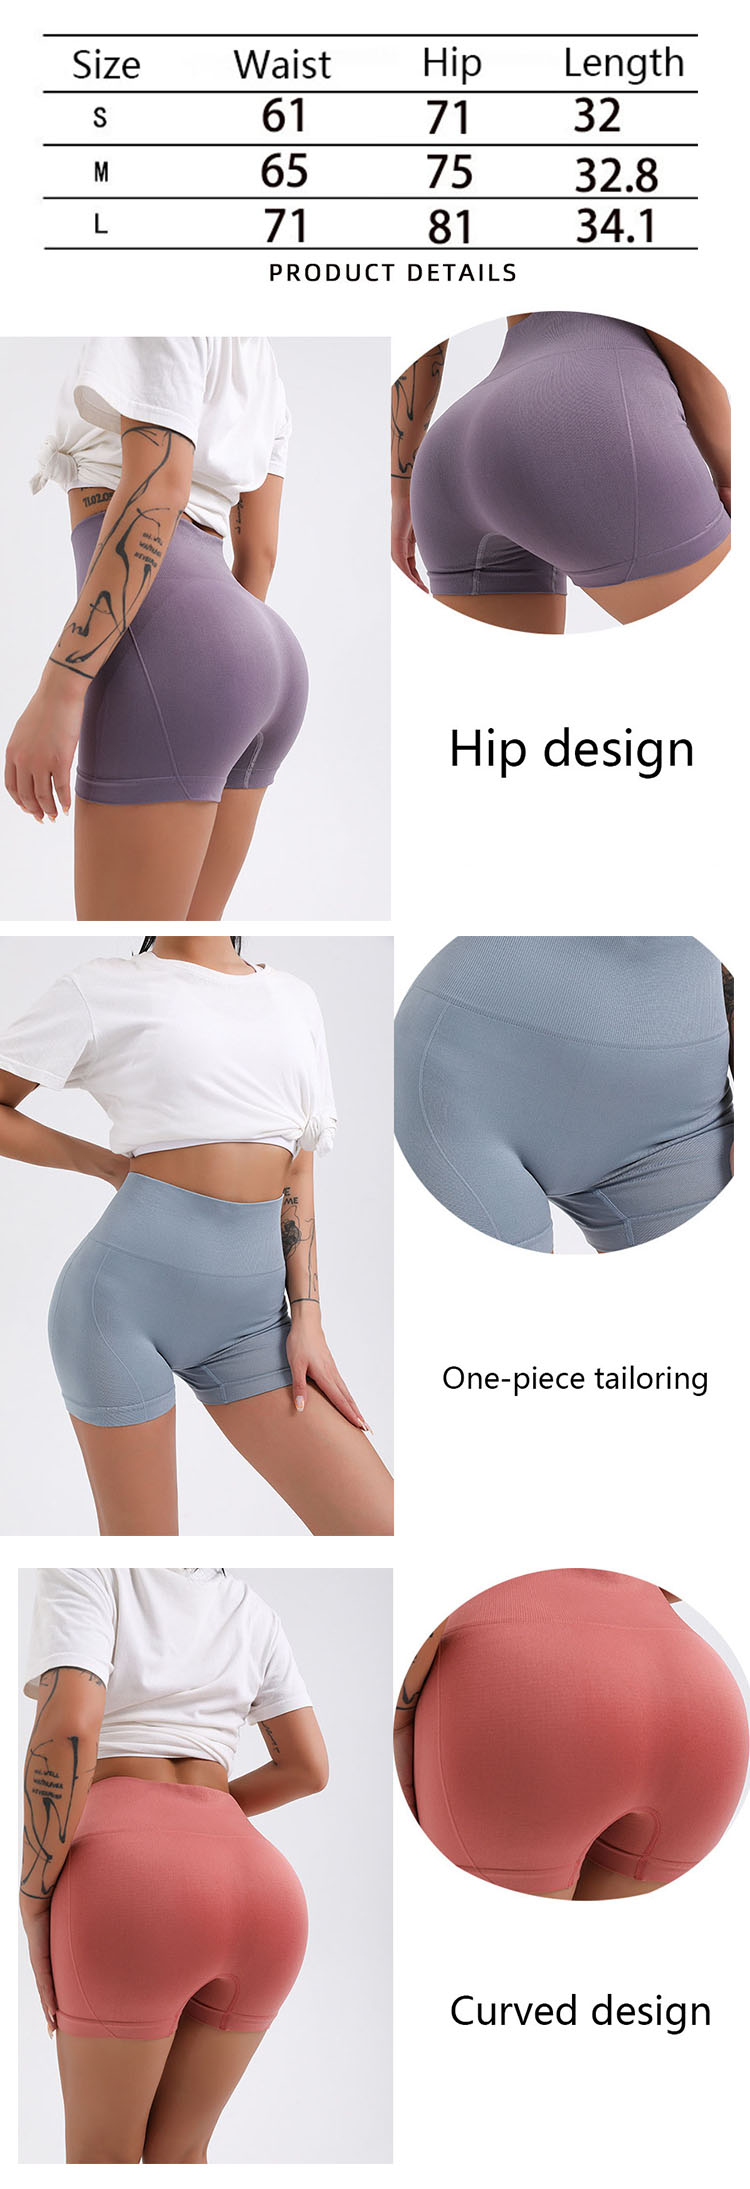 Womens yoga dress pants consumers are increasingly eager for personalized performance and fit